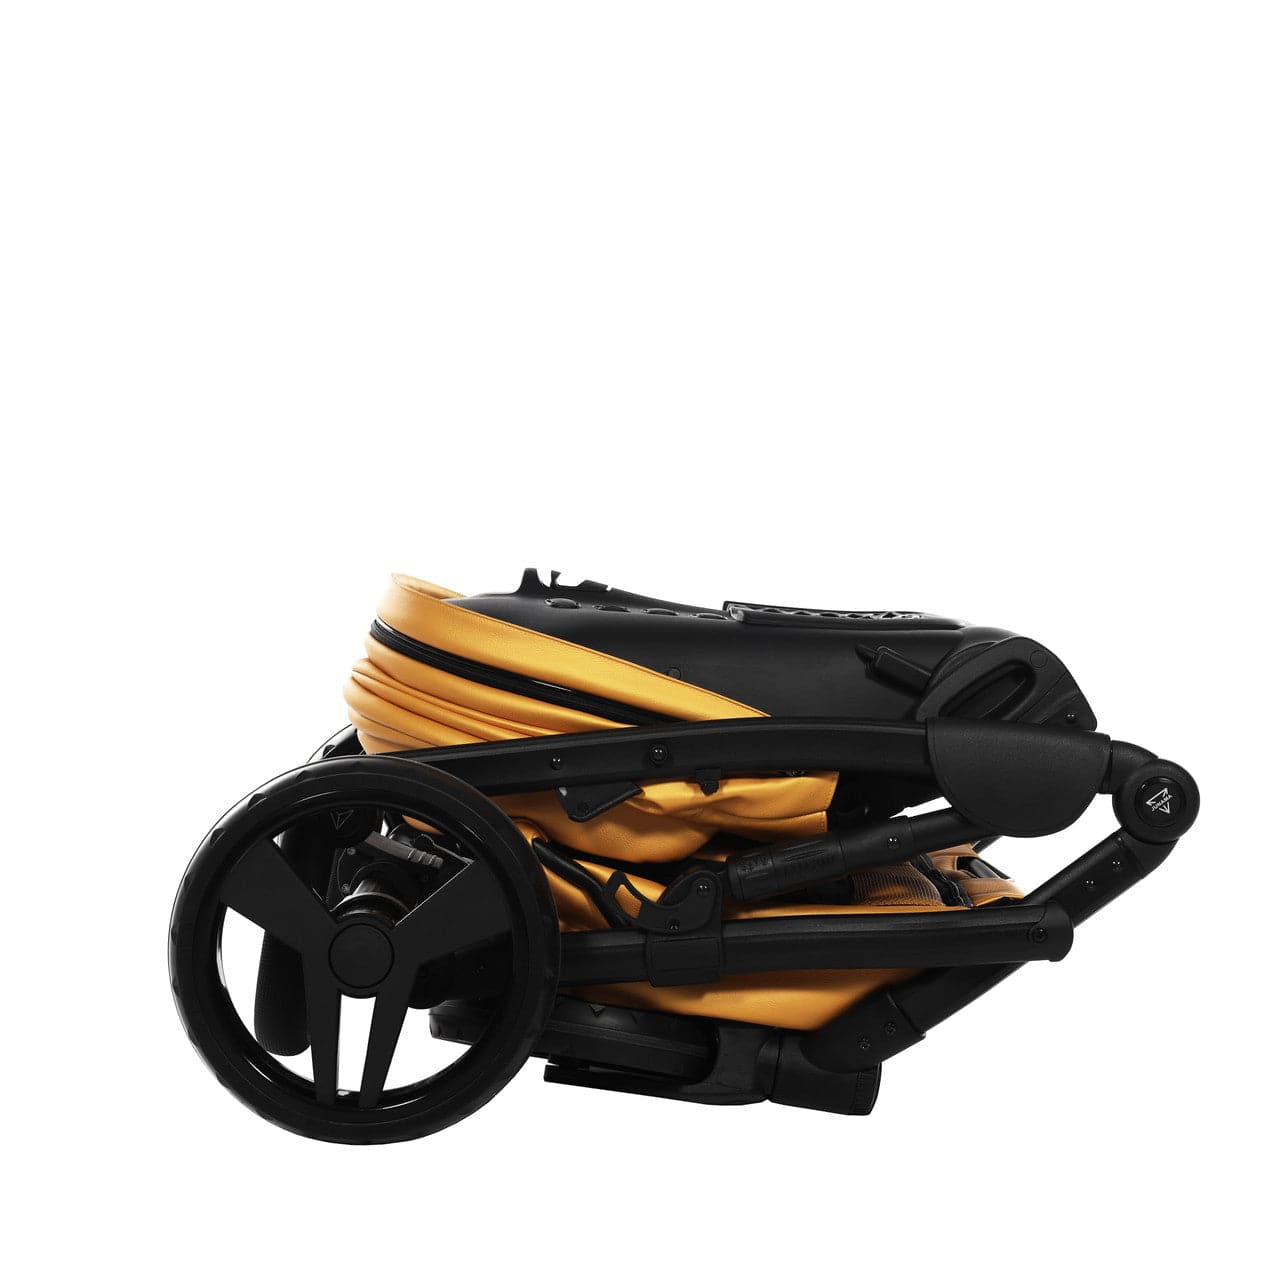 Junama S-Class 2 In 1 Pram - Yellow -  | For Your Little One